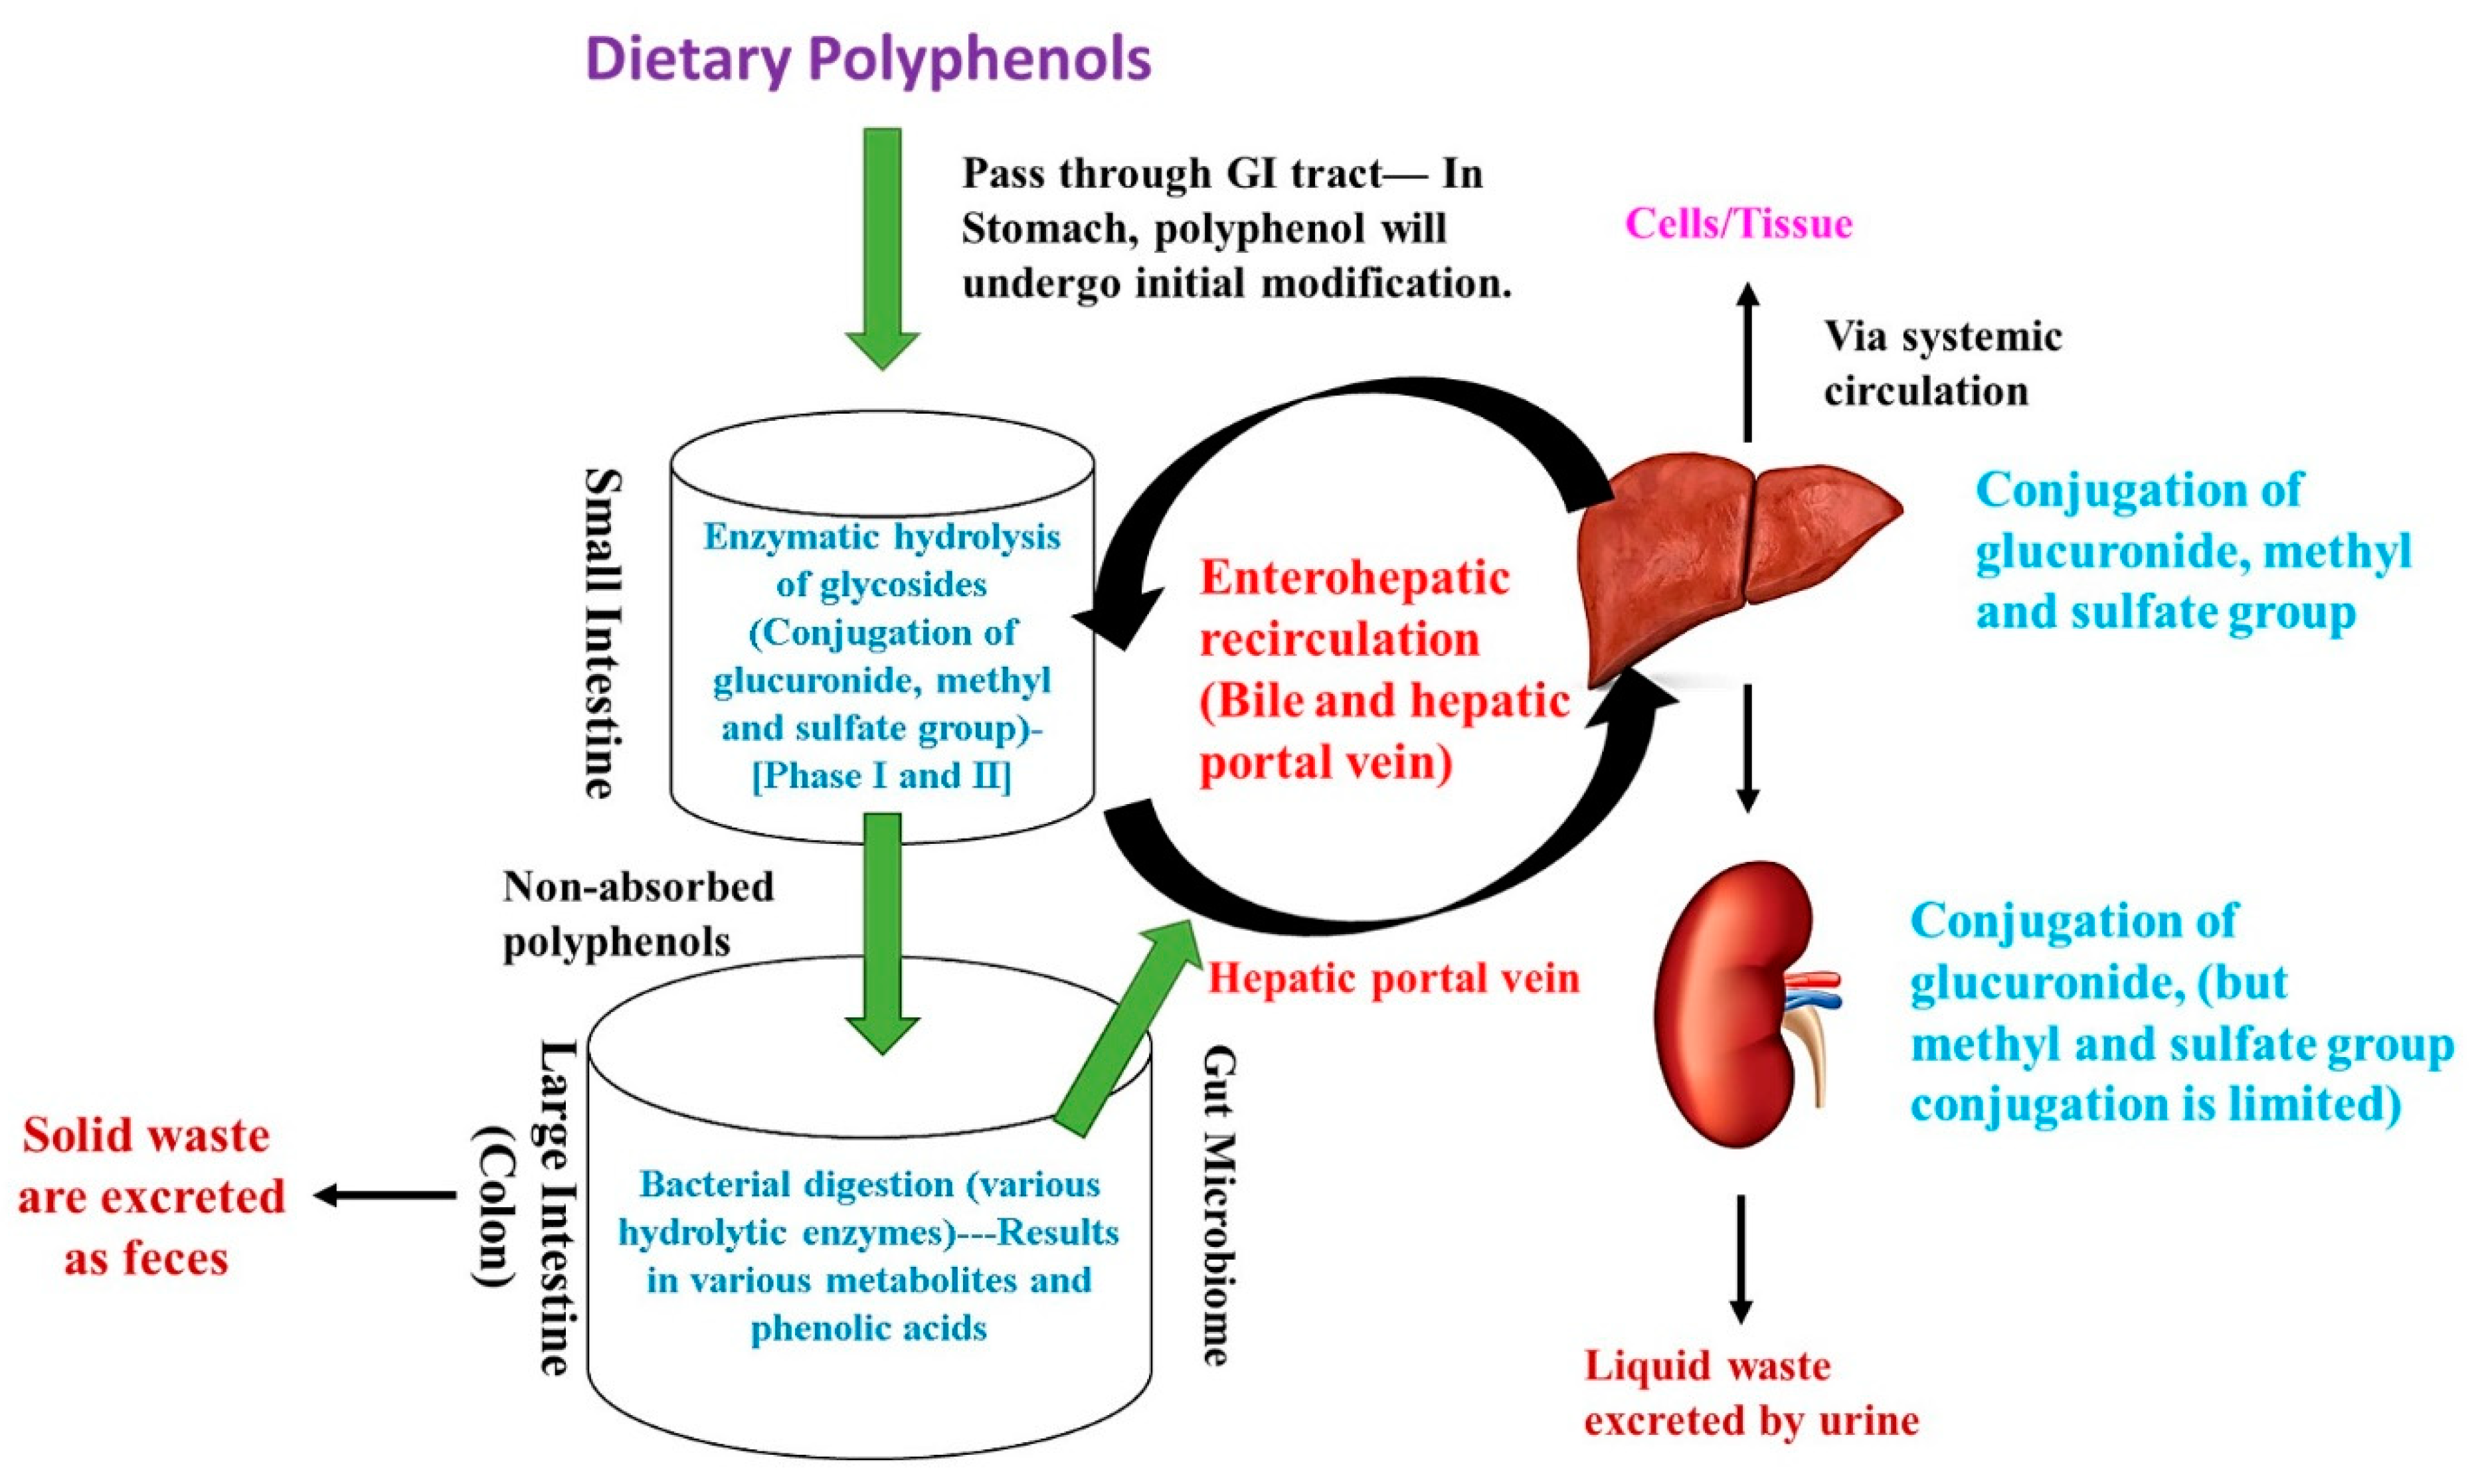 Polyphenols and digestion